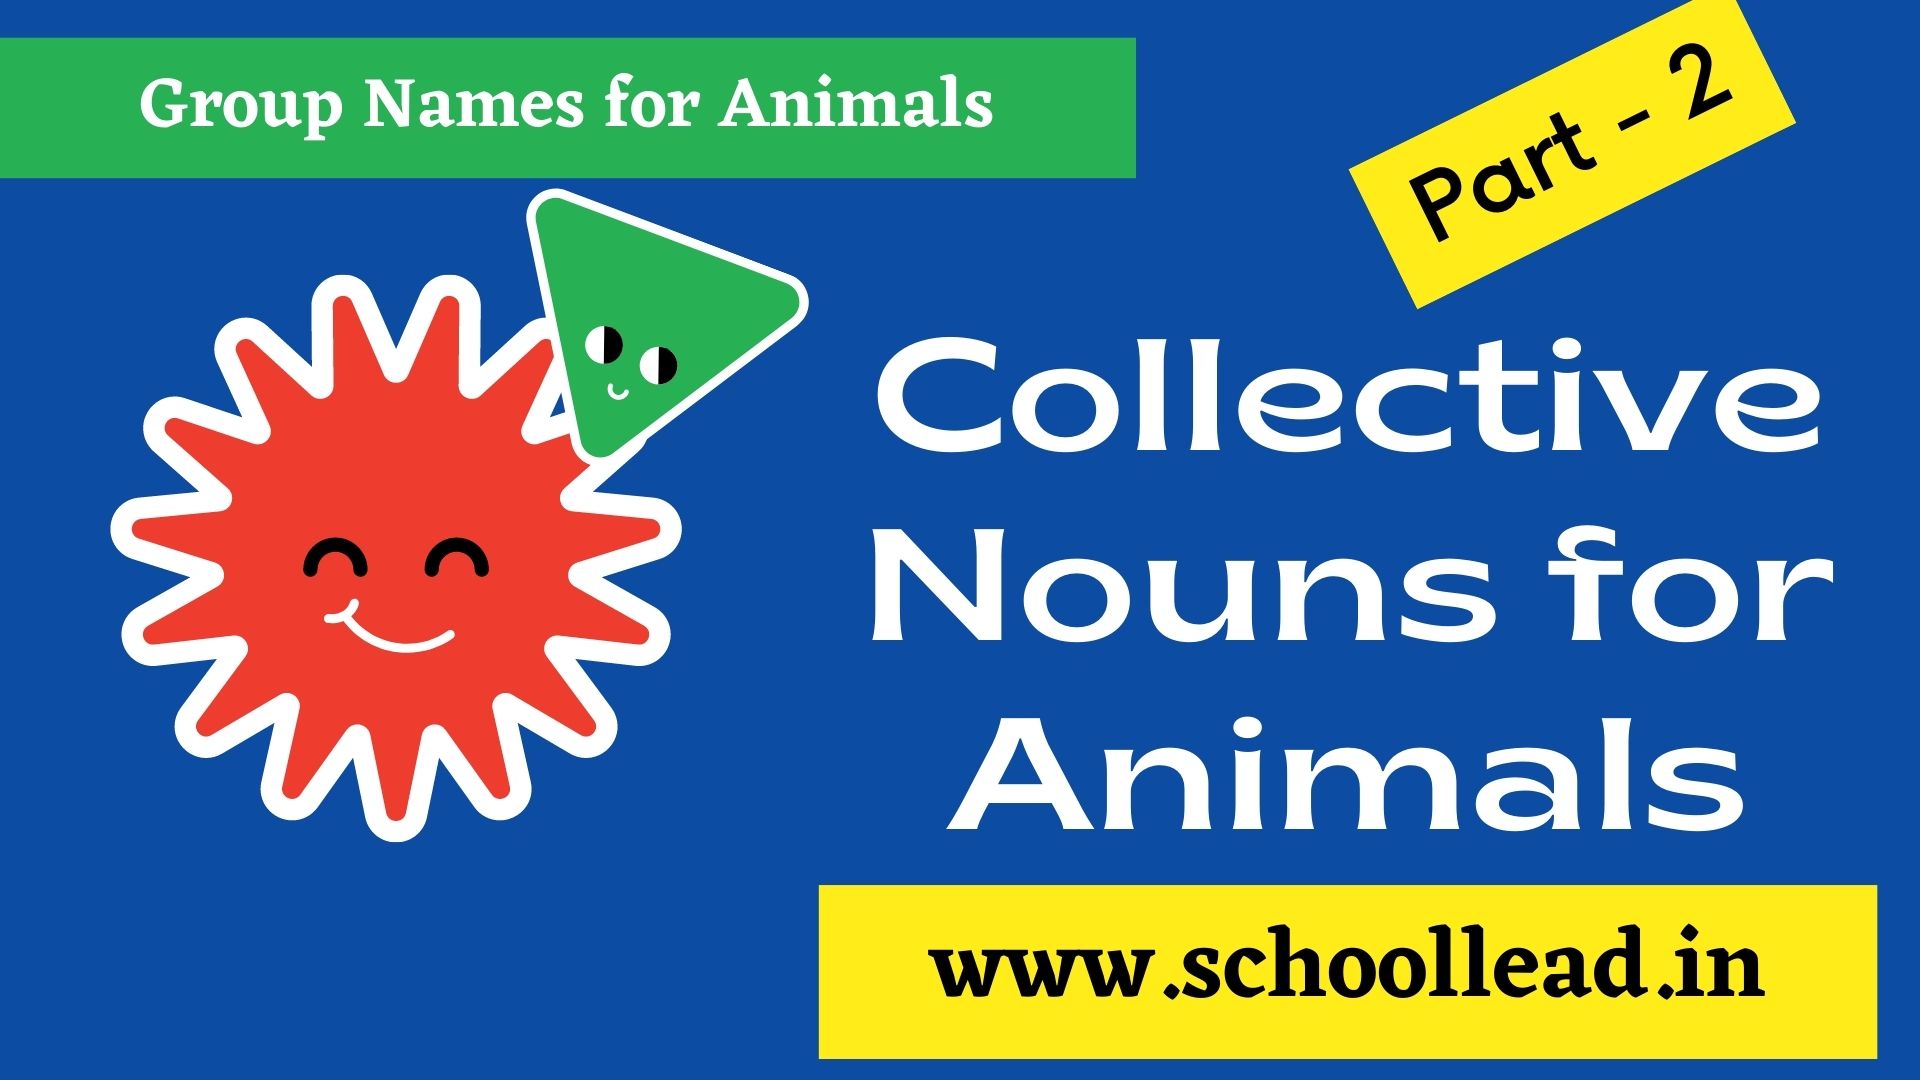 Collective Nouns for Animals and Birds - English Vocabulary - School Lead